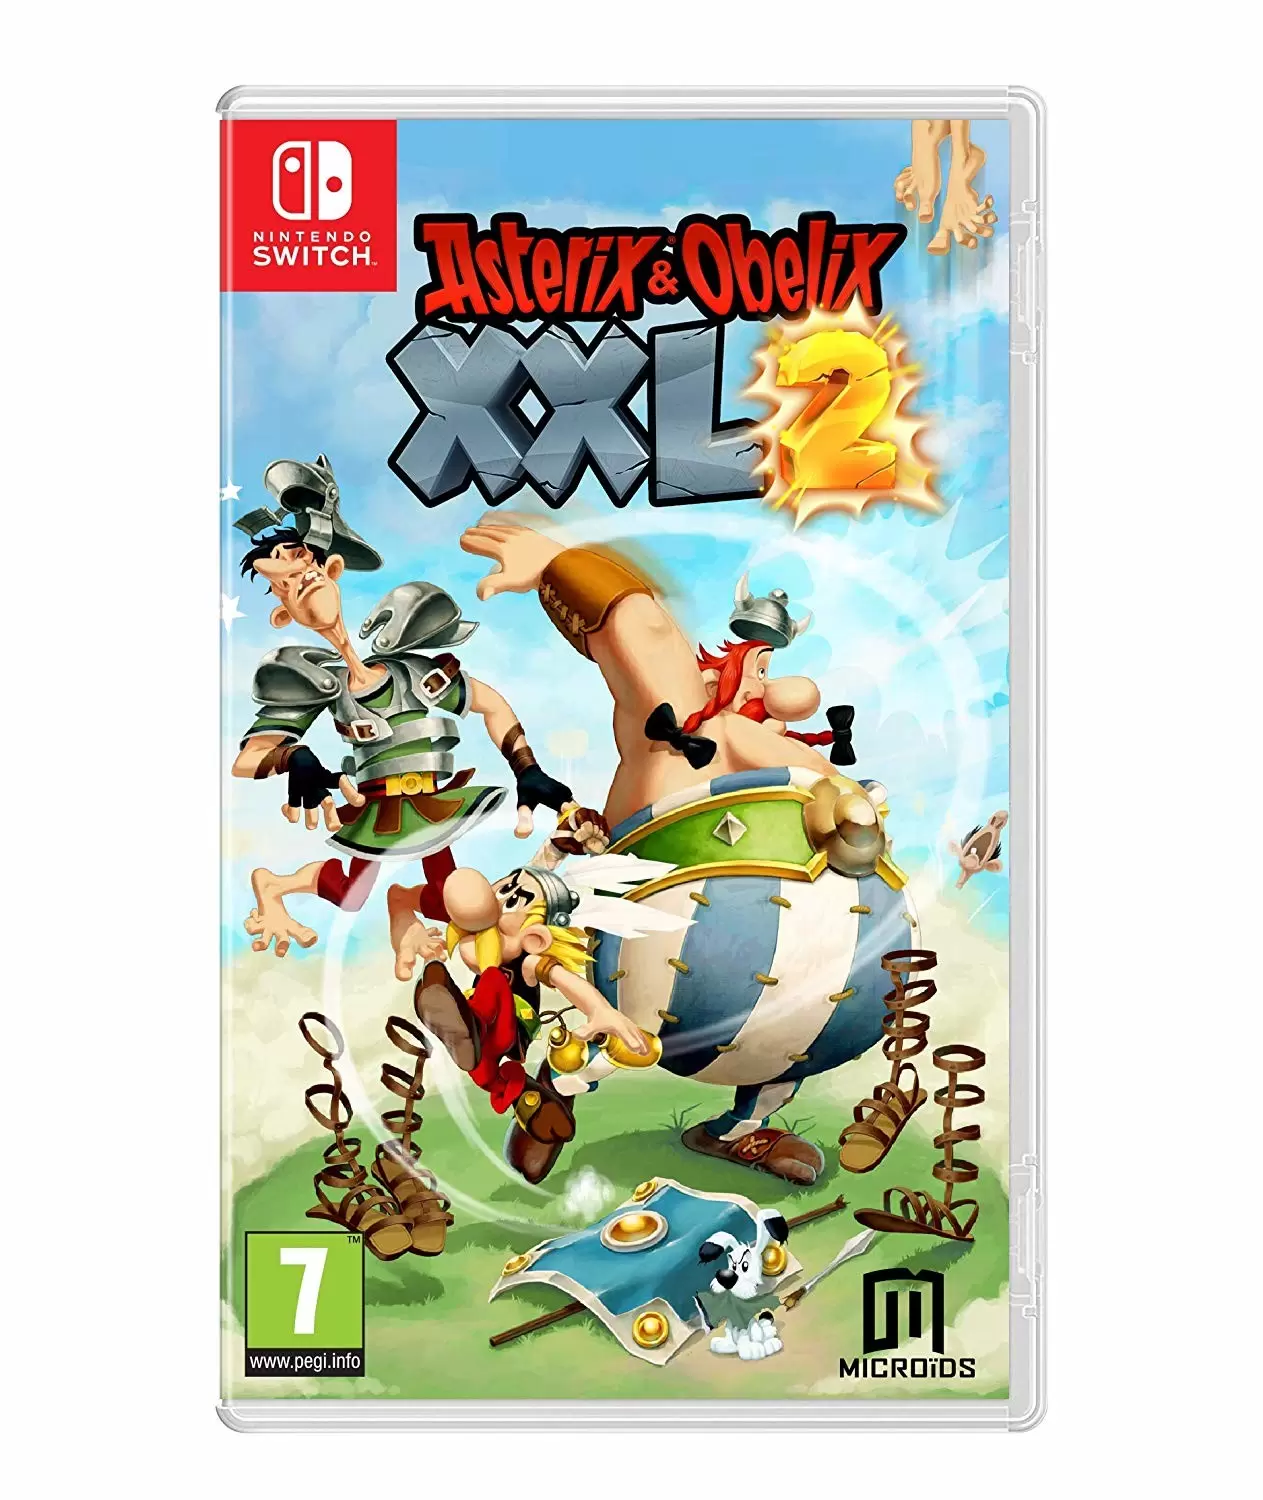 Asterix & Obelix: Heroes for Nintendo Switch - Nintendo Official Site